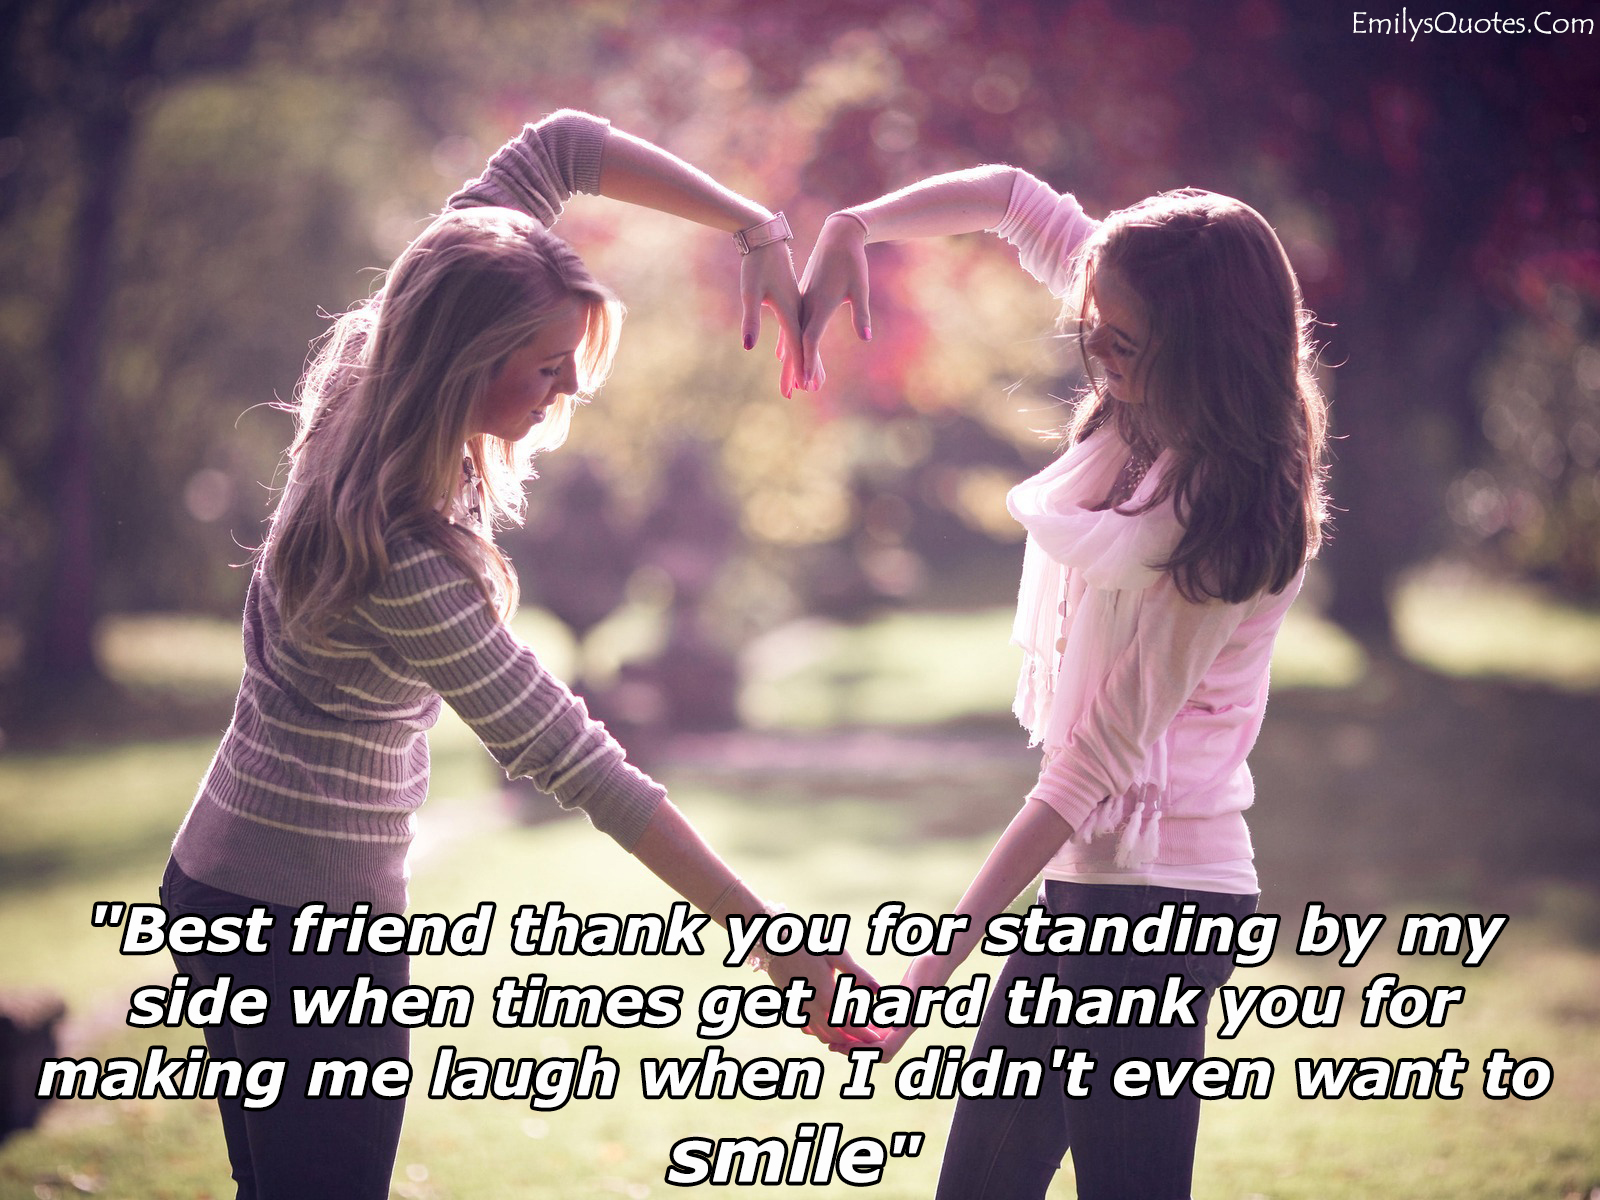 Quotes Quotes About Love And Friendship Adorable Quotes